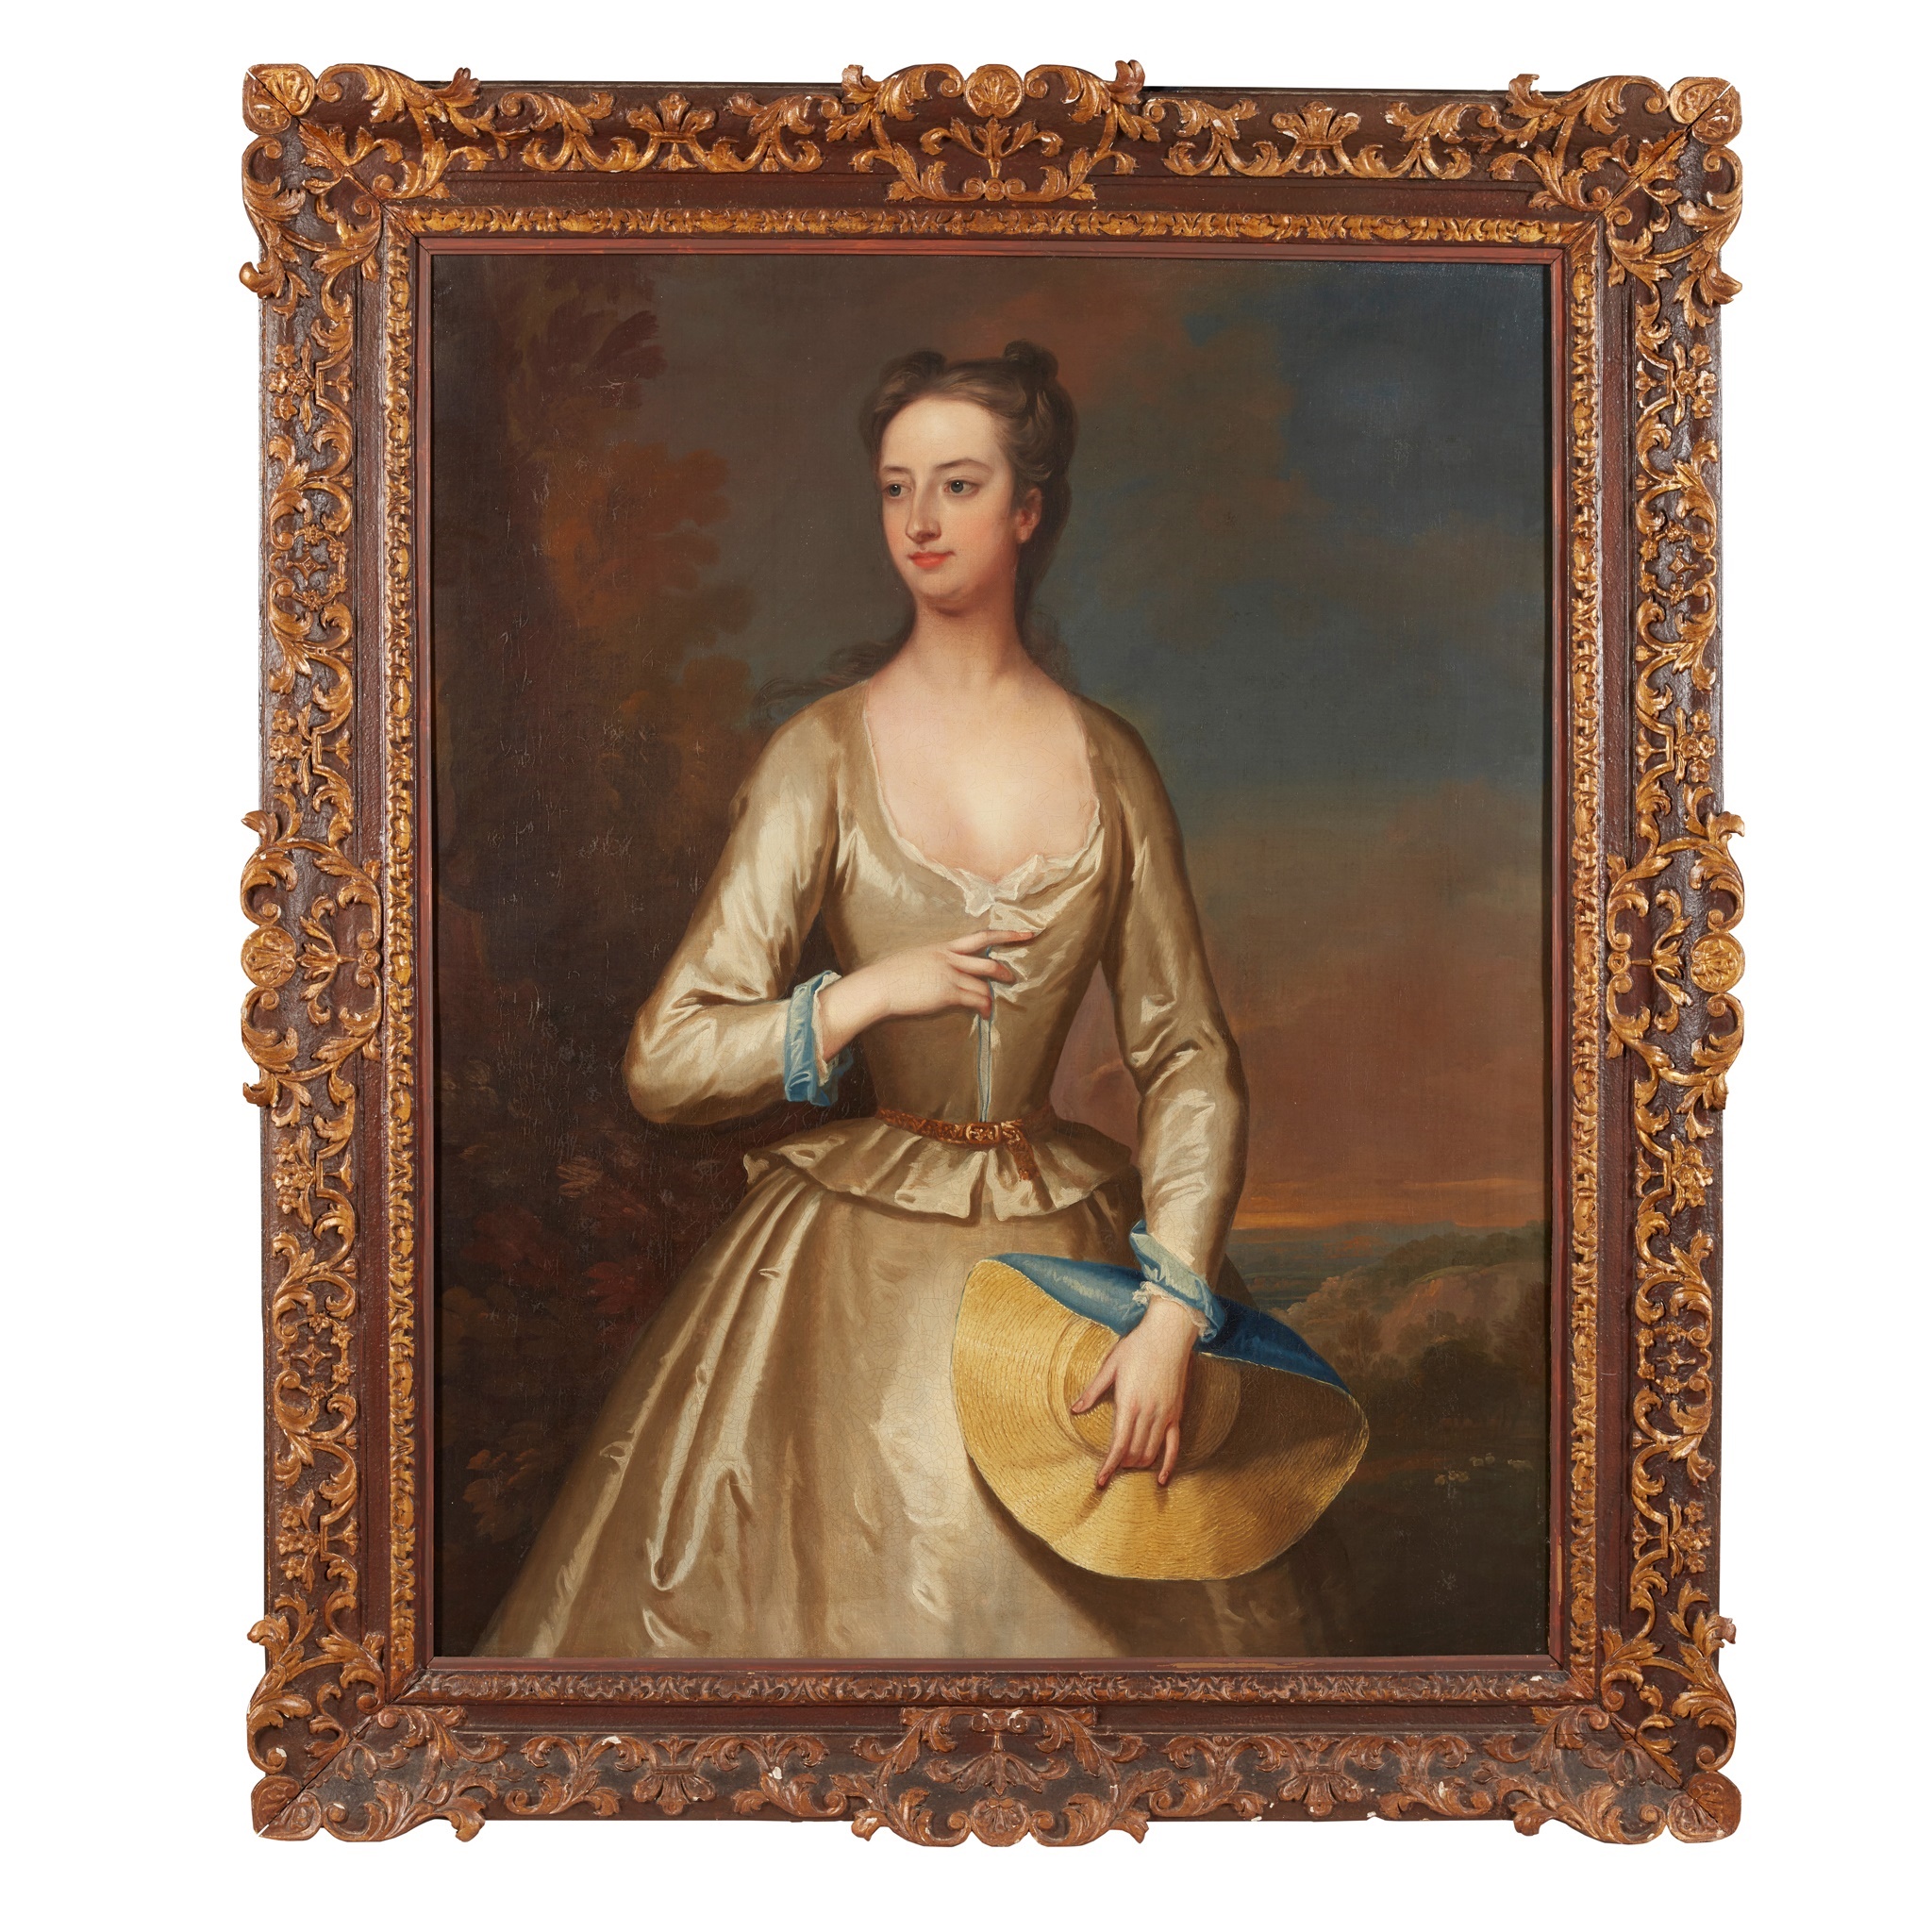 LOT 76 | CHARLES JERVAS | PORTRAIT OF A LADY IN WHITE